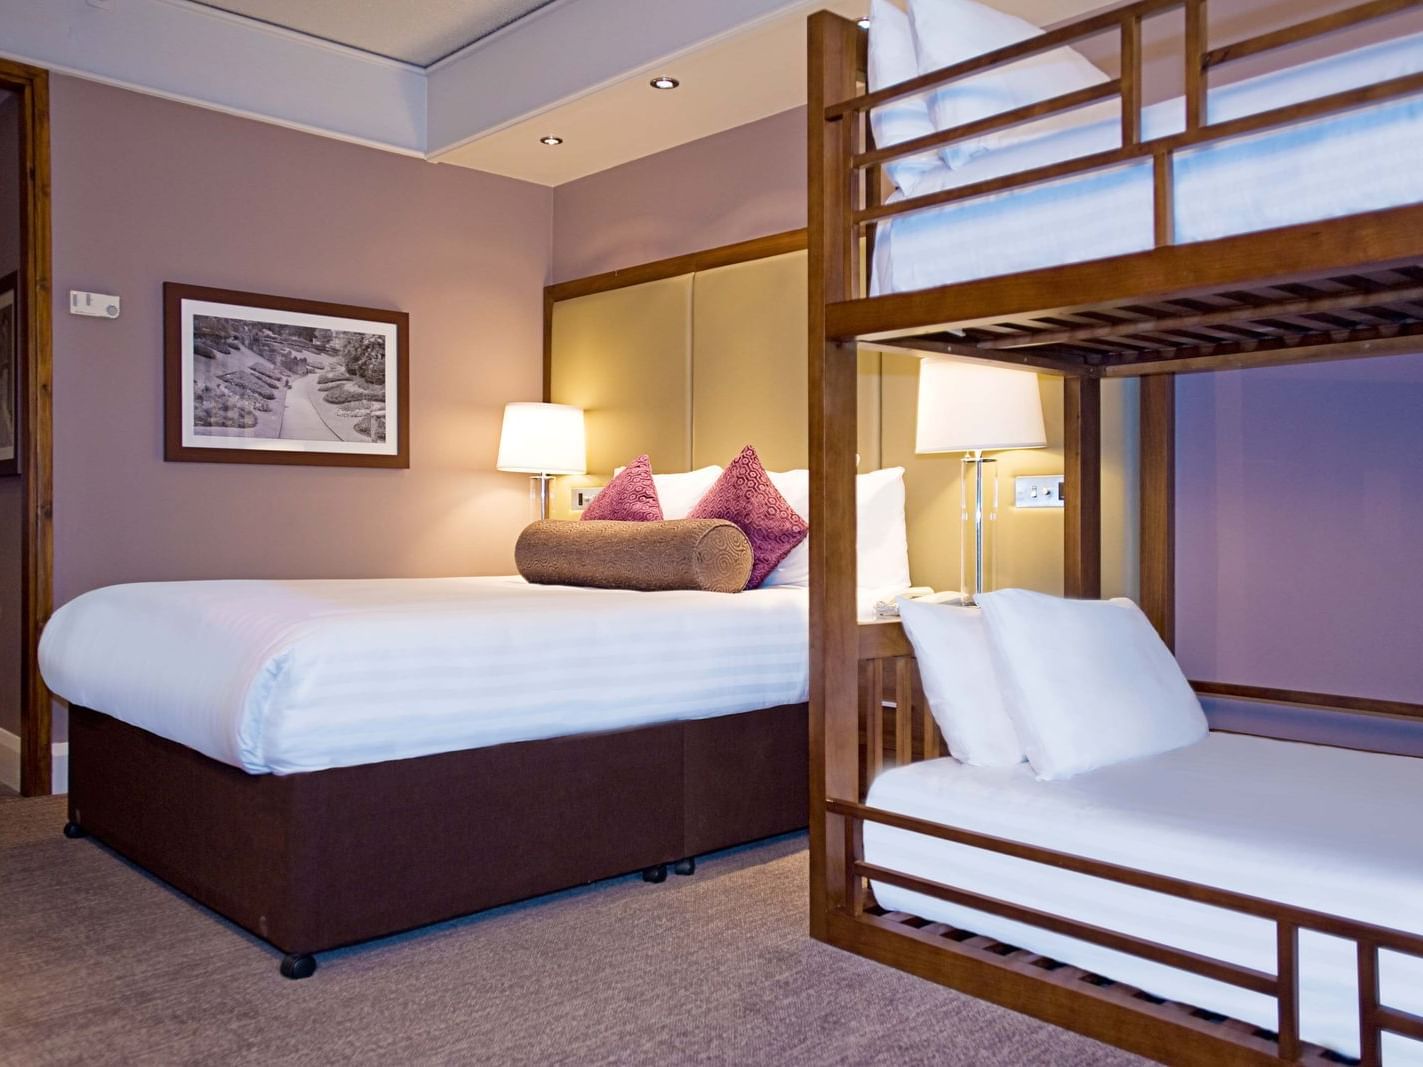 The Family King Room at Sandman Signature London Gatwick Hotel with one king bed (with premium pillow-top) and two bunk beds